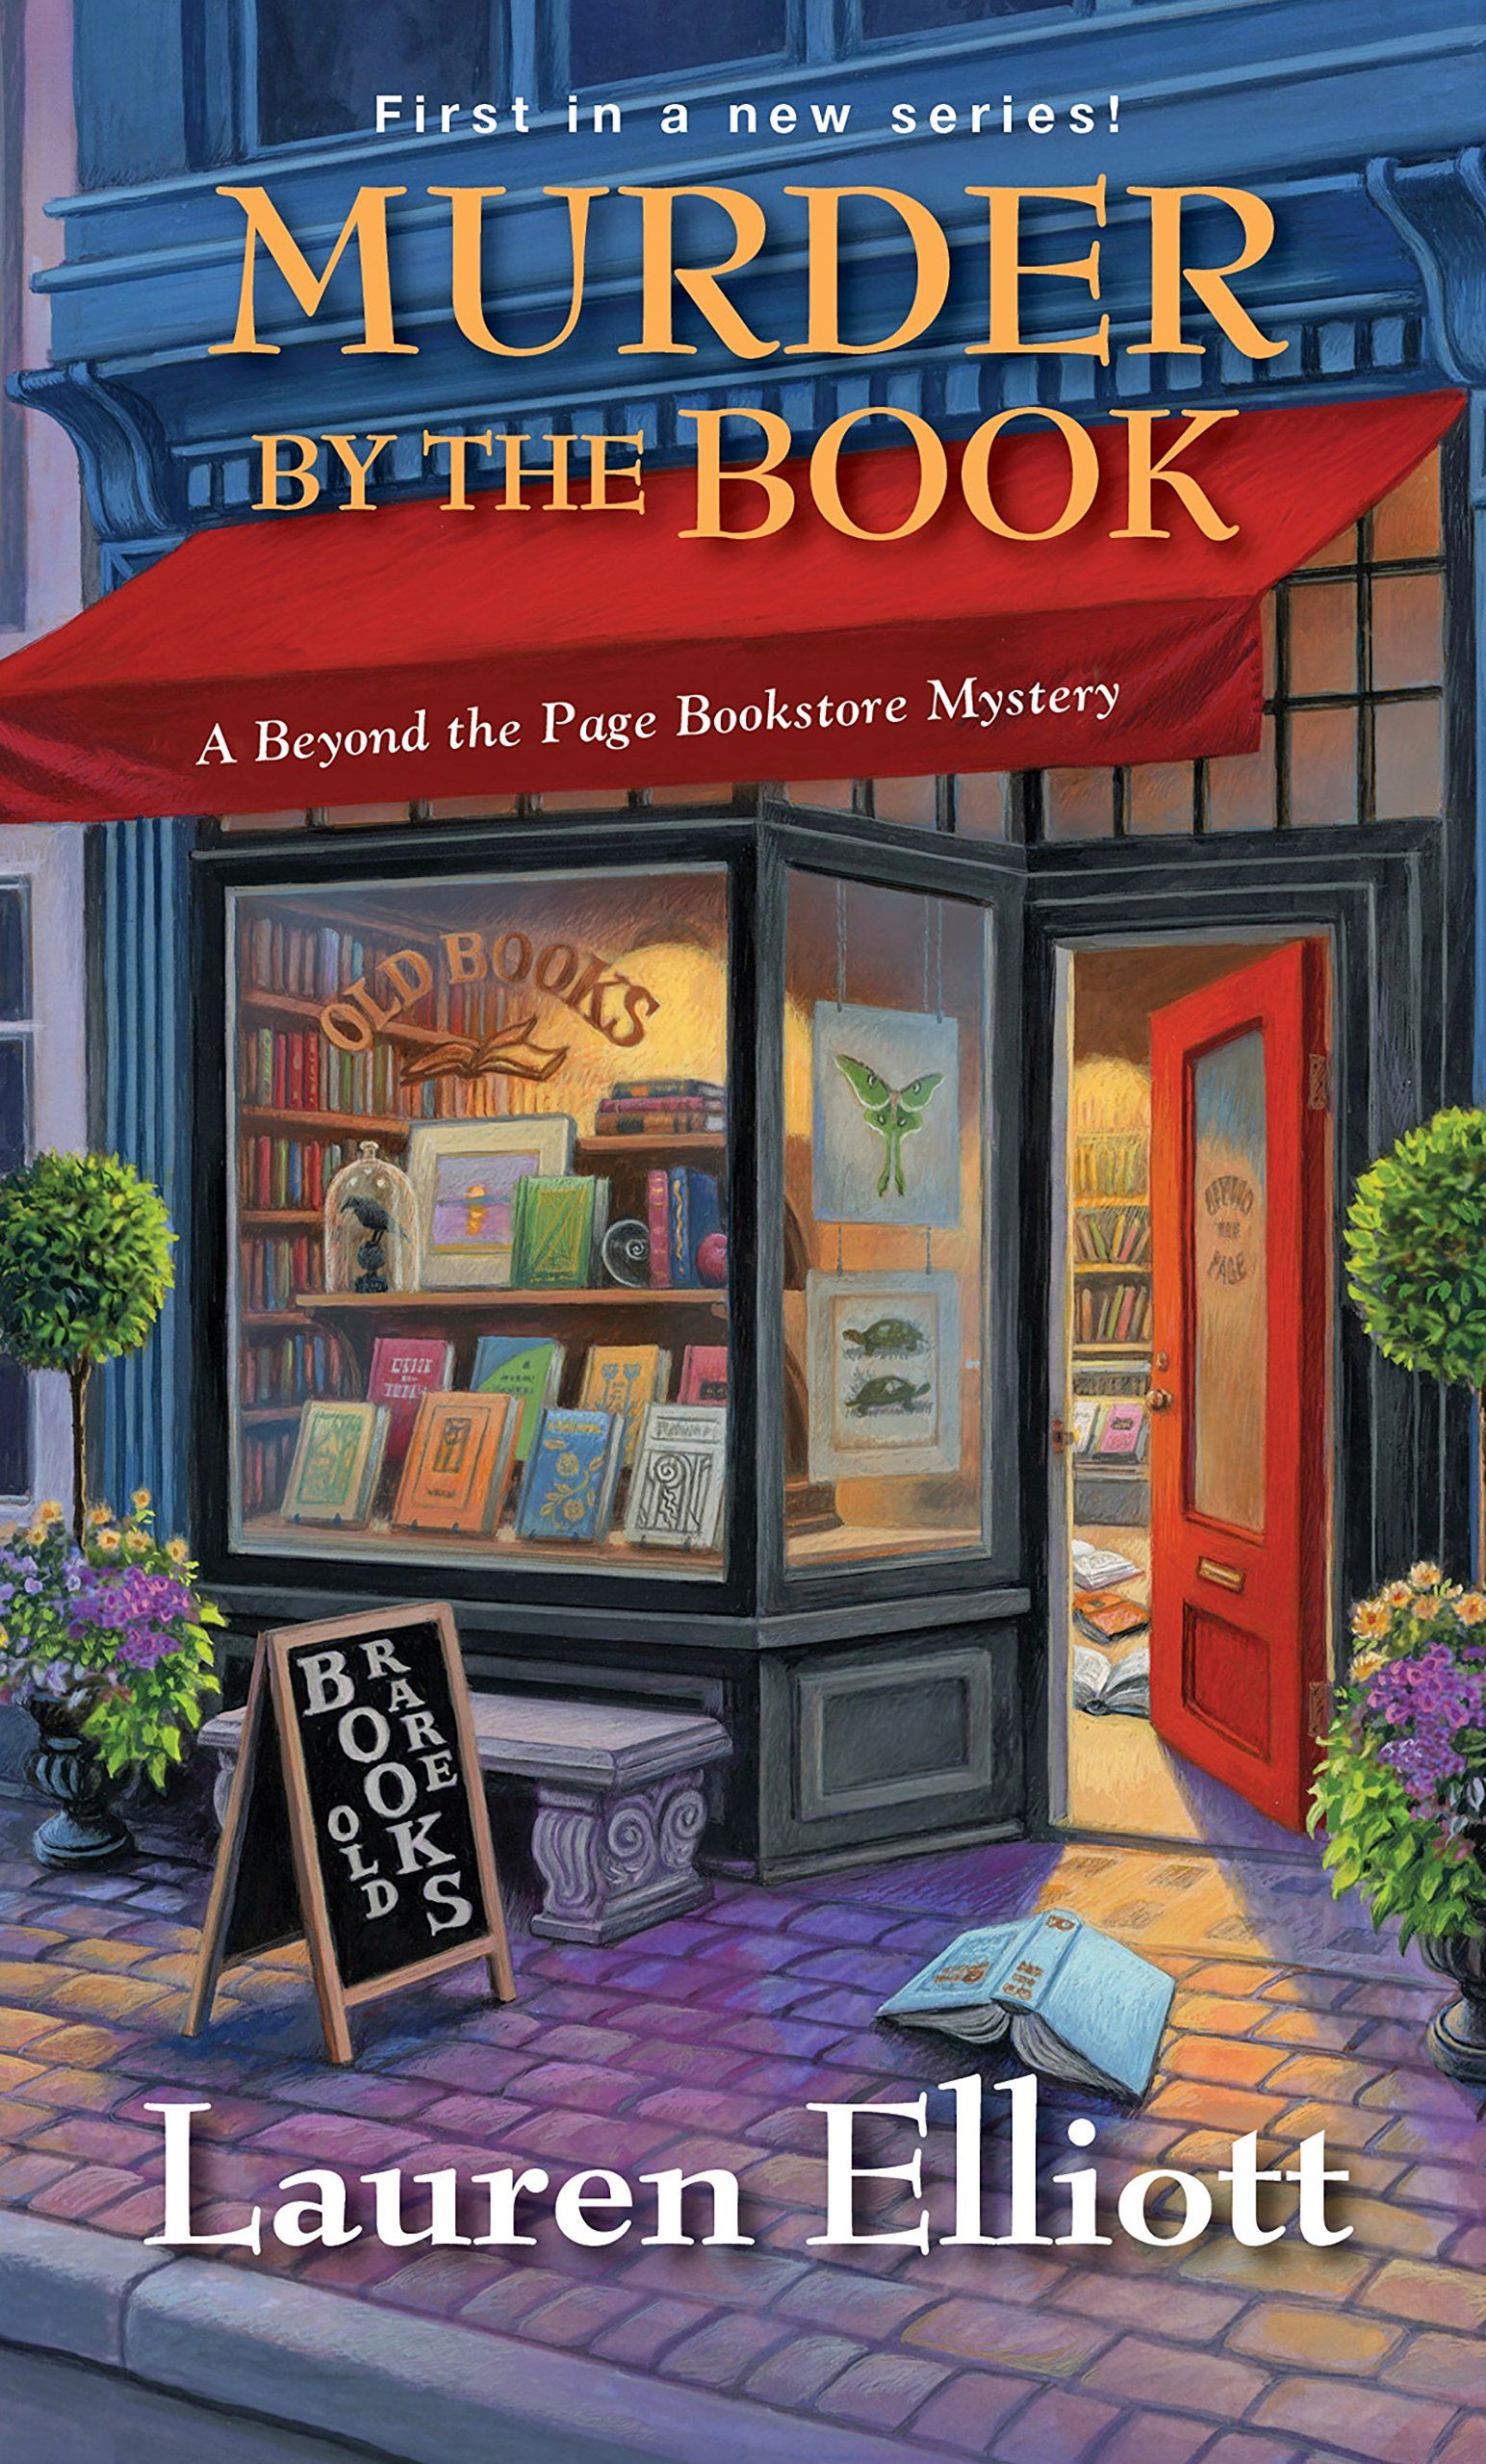 Beyond the Page Bookstore